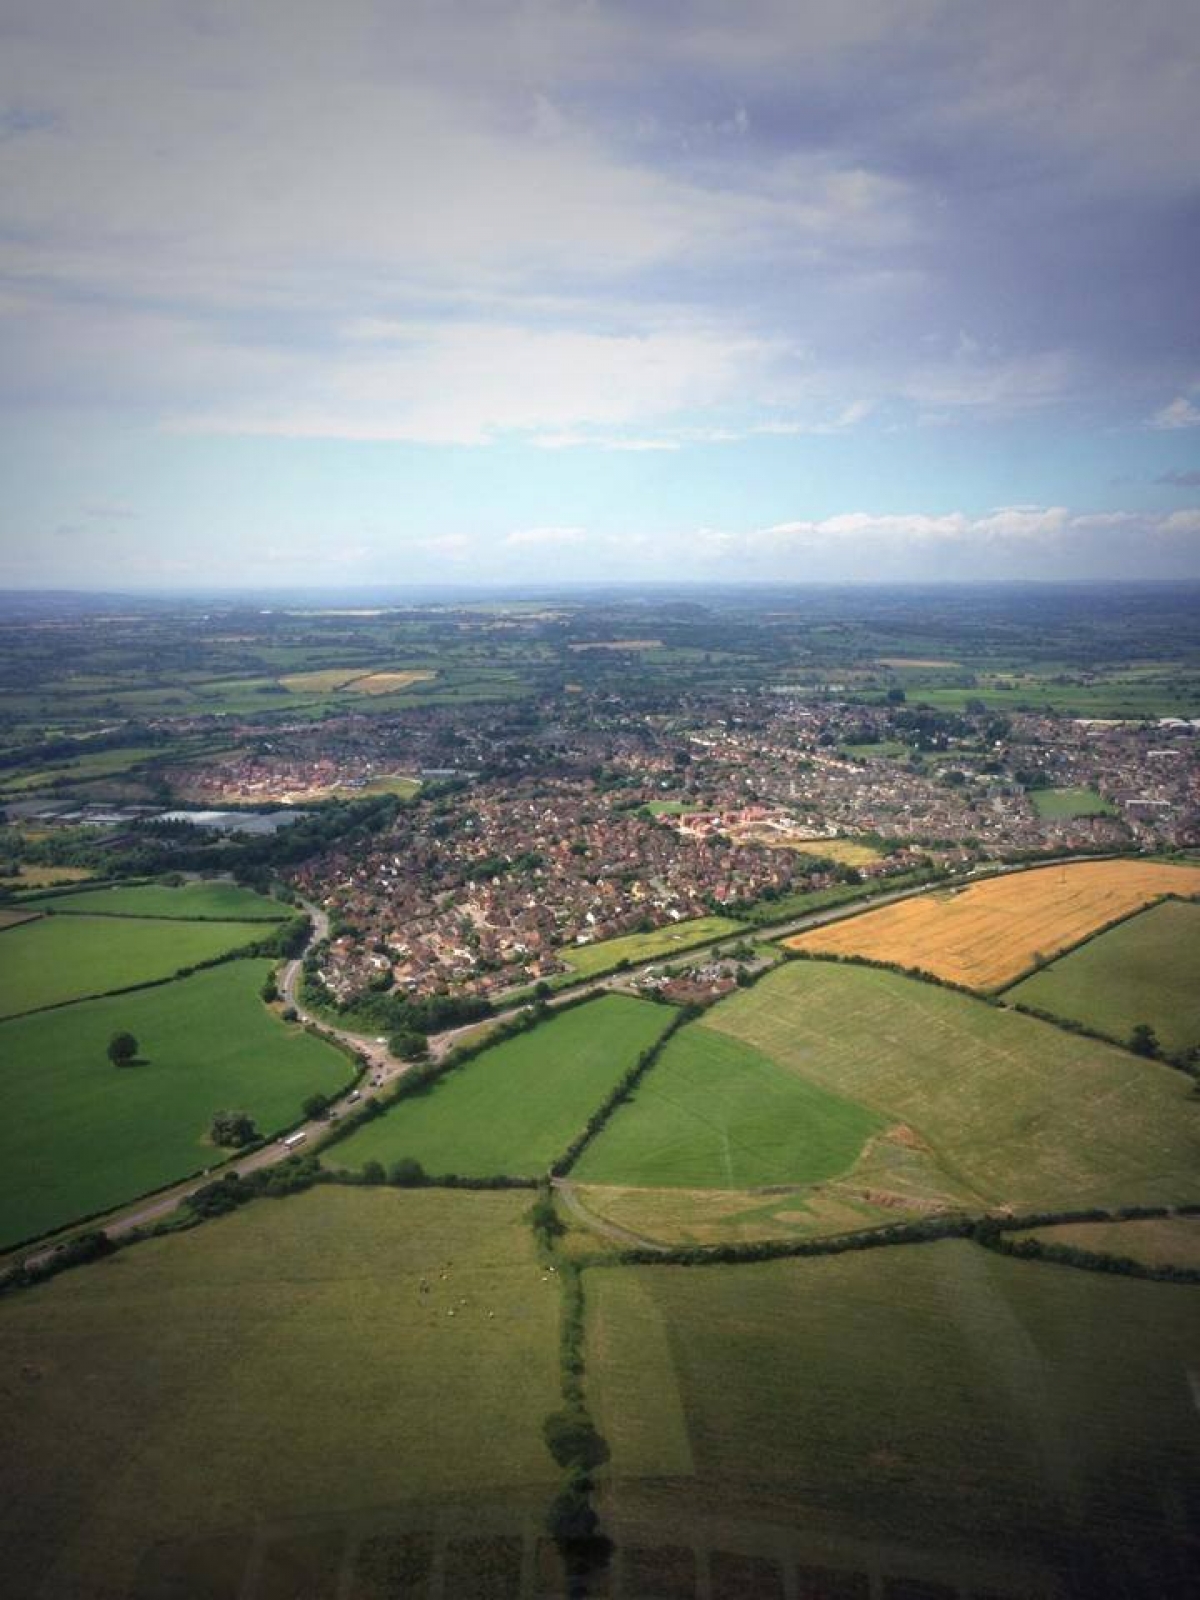 Up Above - Wiltshire Air Ambulance